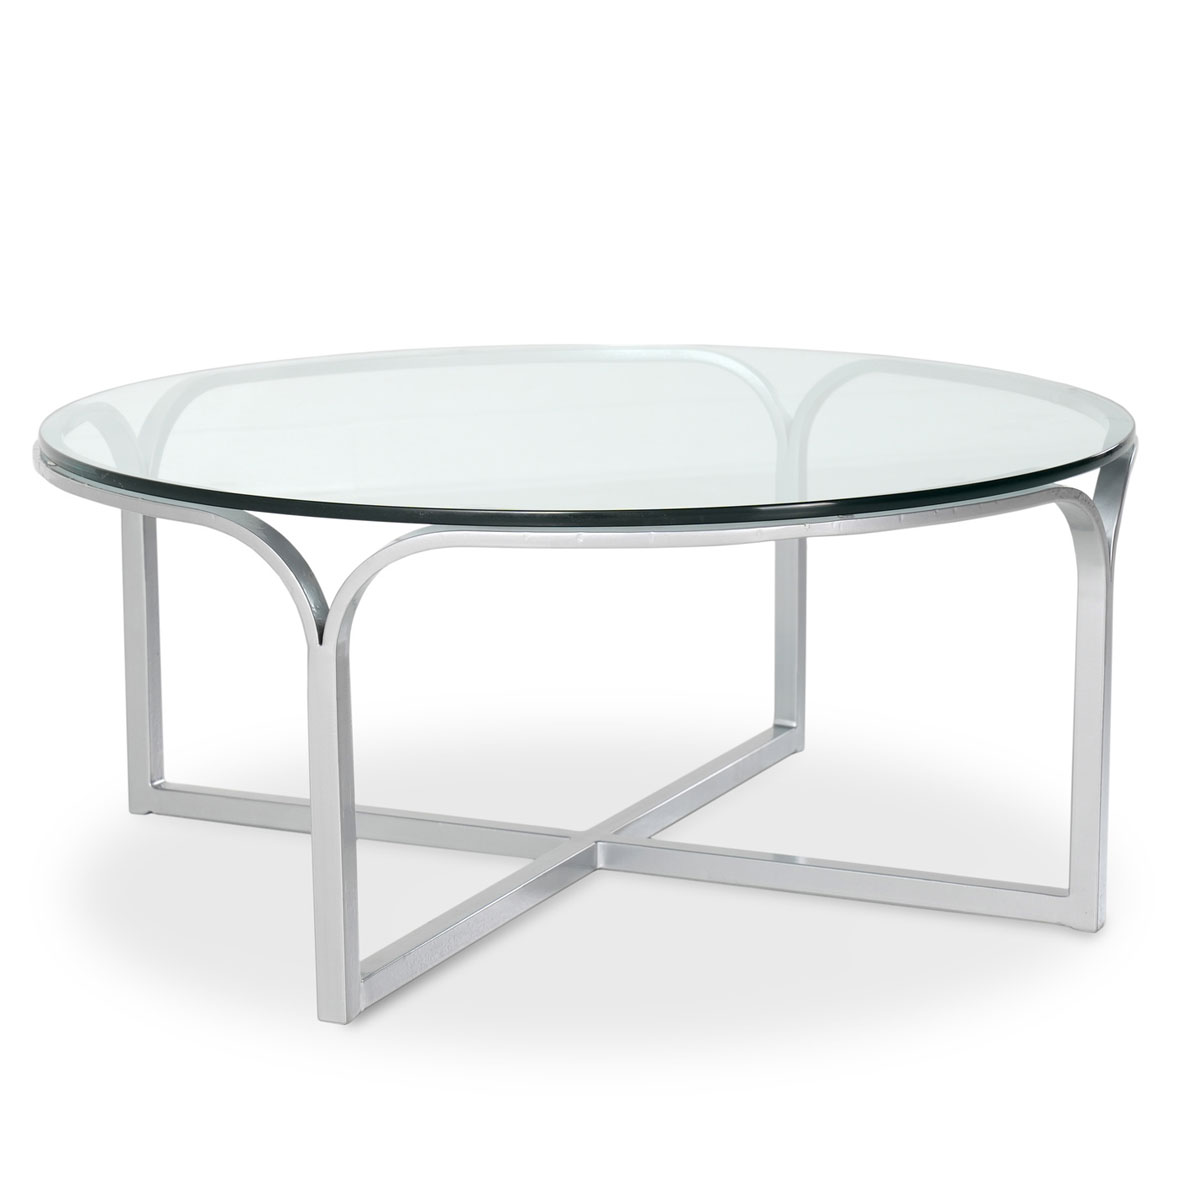 Charleston Forge Wave 42 inch Round Cocktail Table 